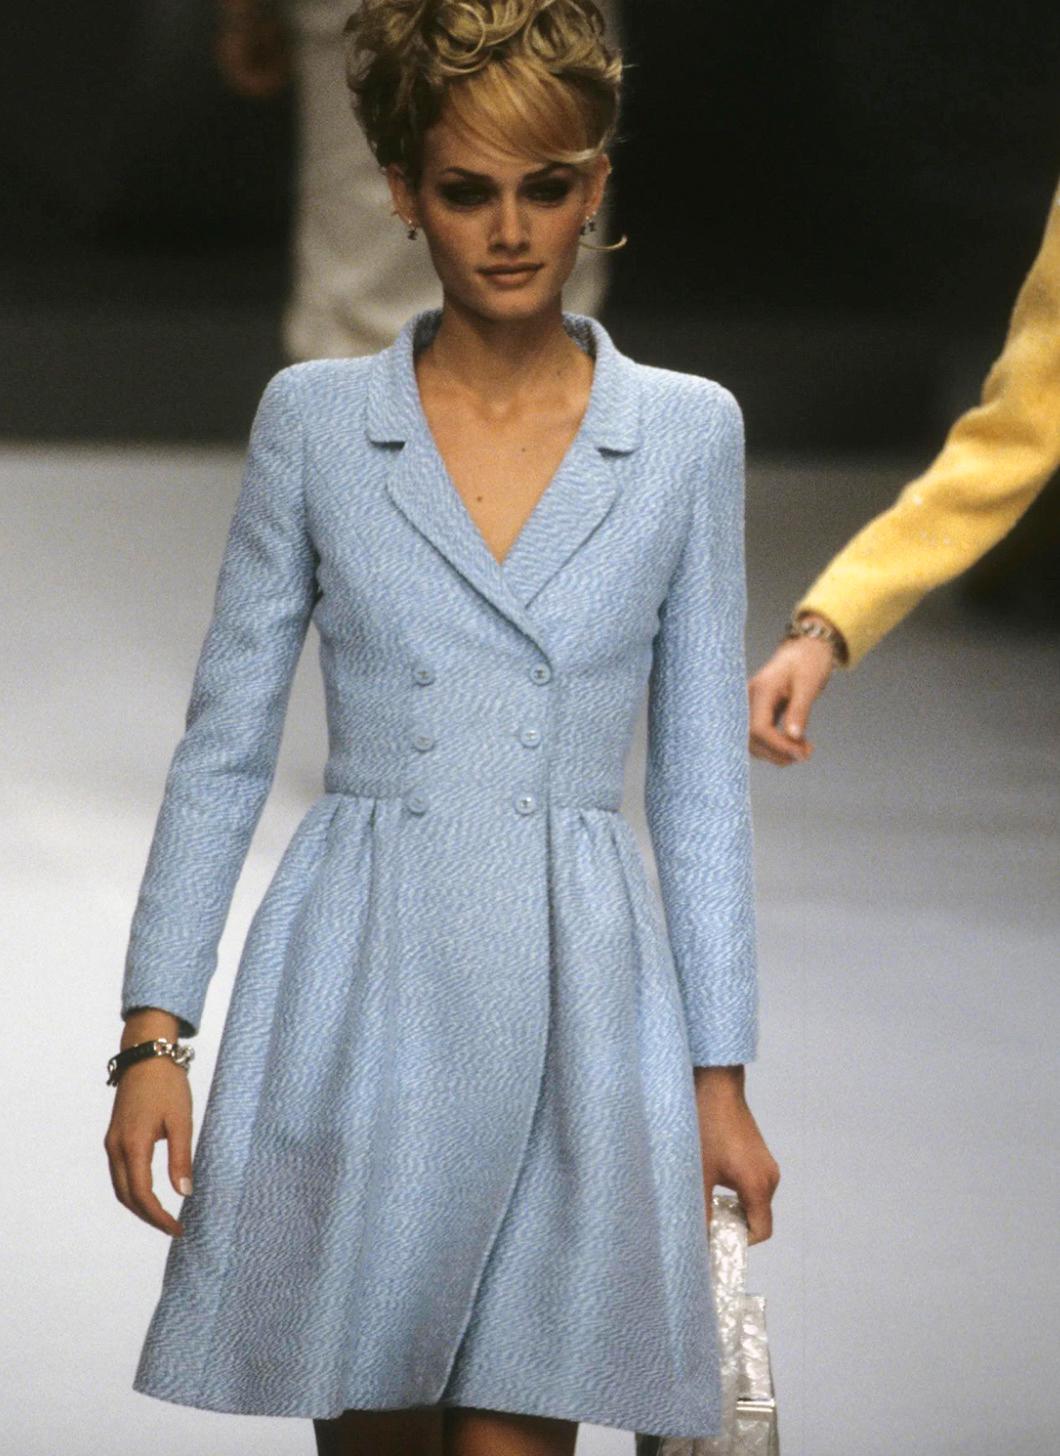 This pretty Chanel coat from the Spring/Summer 1996 collection, famously worn by Amber Valletta, is a stunning piece crafted from baby blue cotton tweed. It boasts a double-breasted design adorned with matching blue CC logo buttons. The luxurious